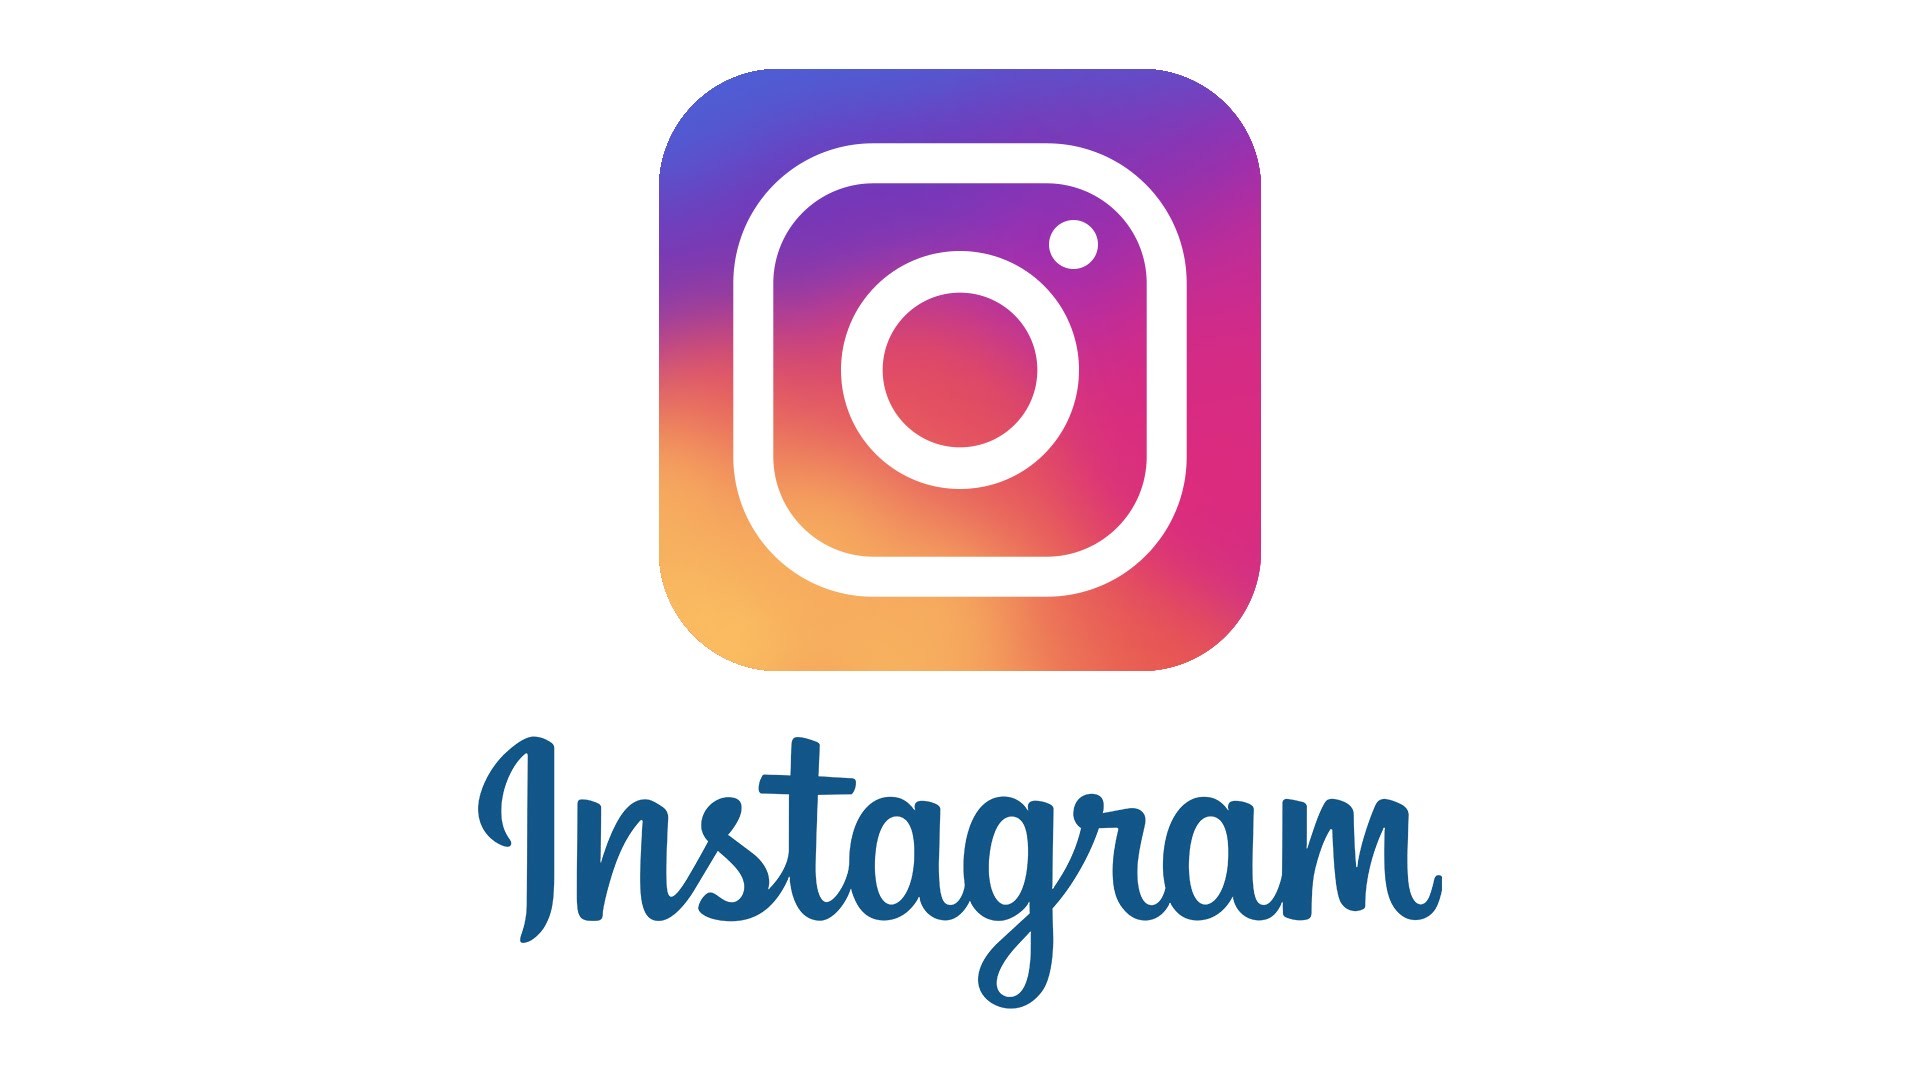 What does Instagram blue tick do?